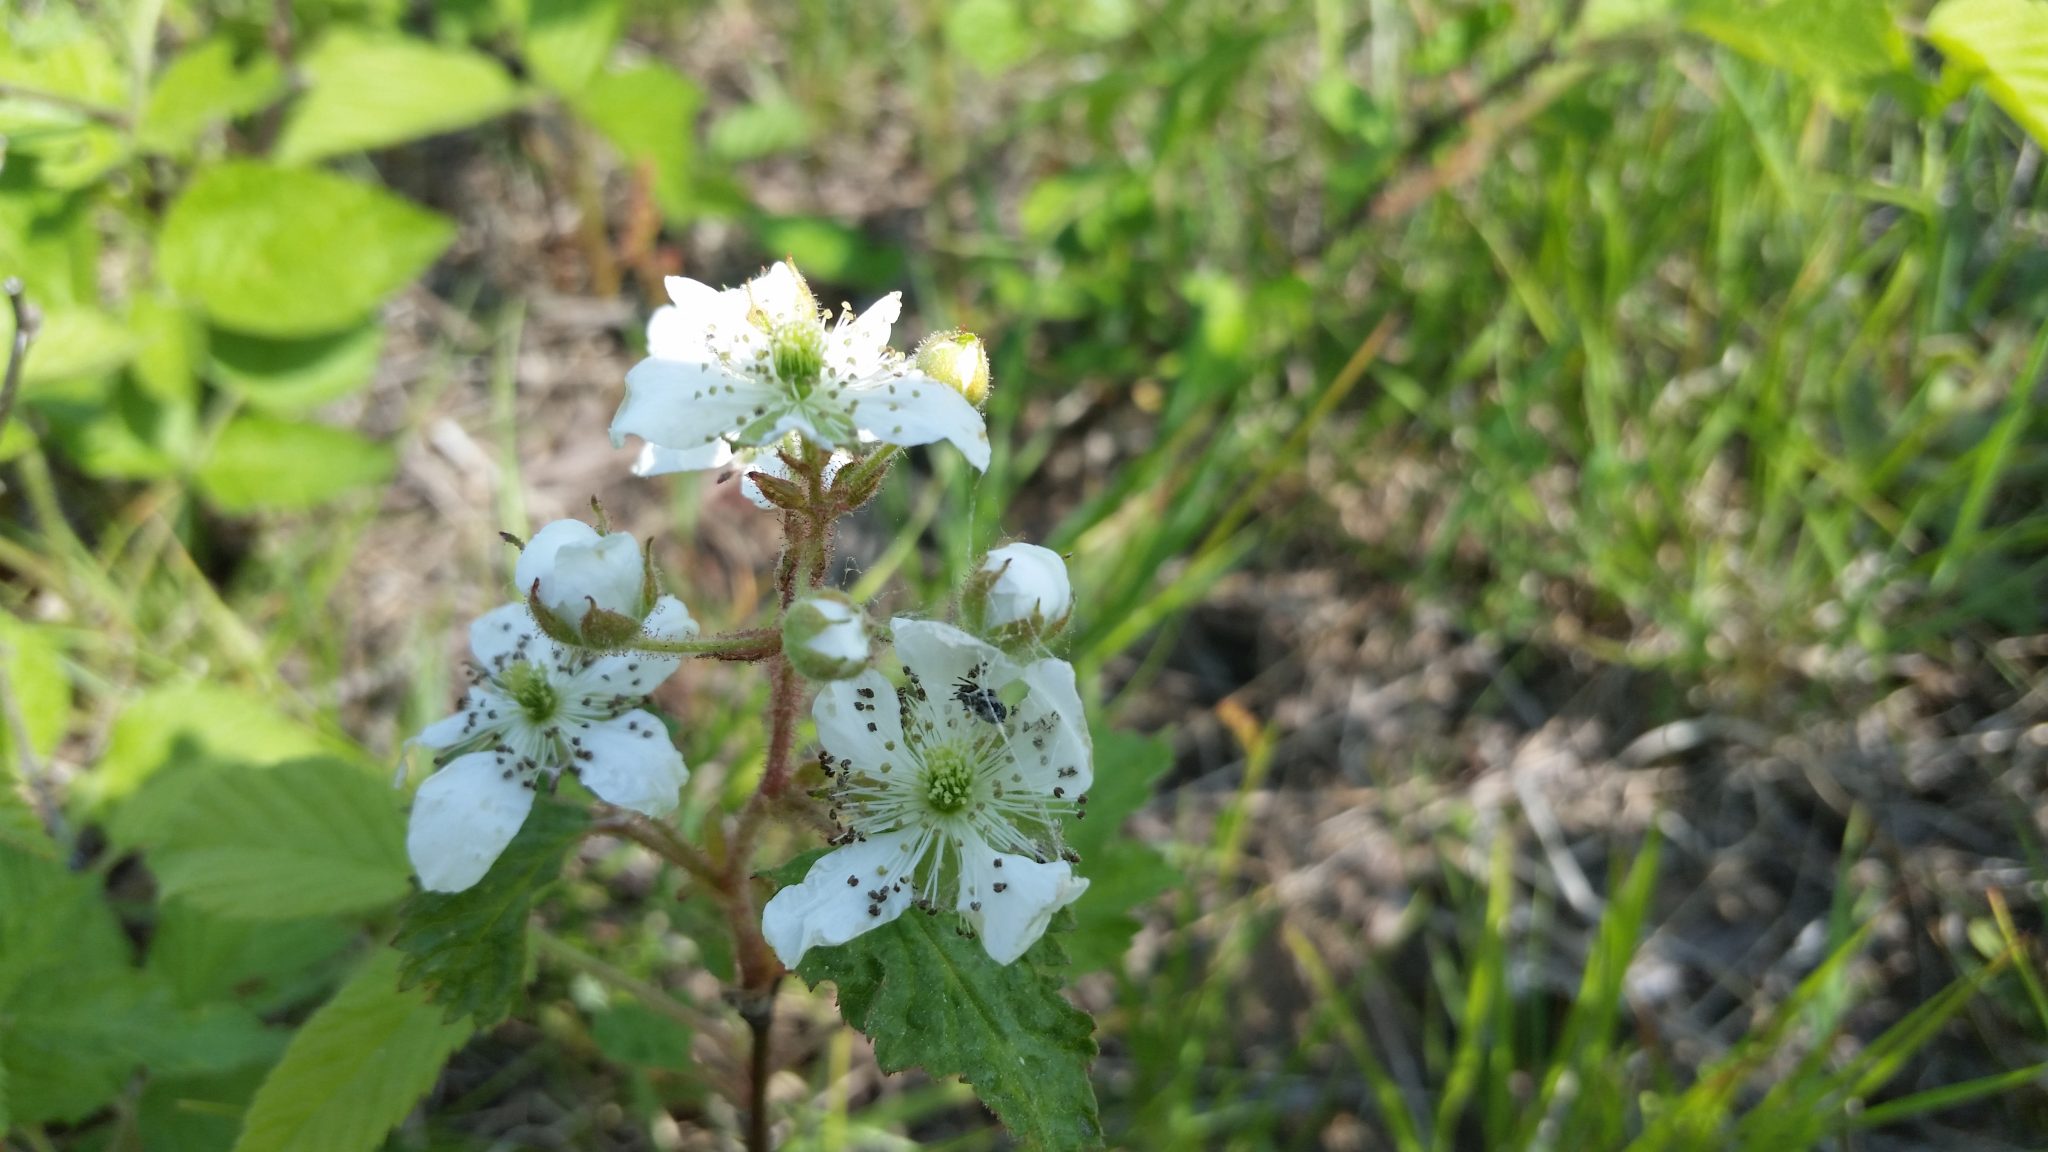 Blackberry blossoms with spider web